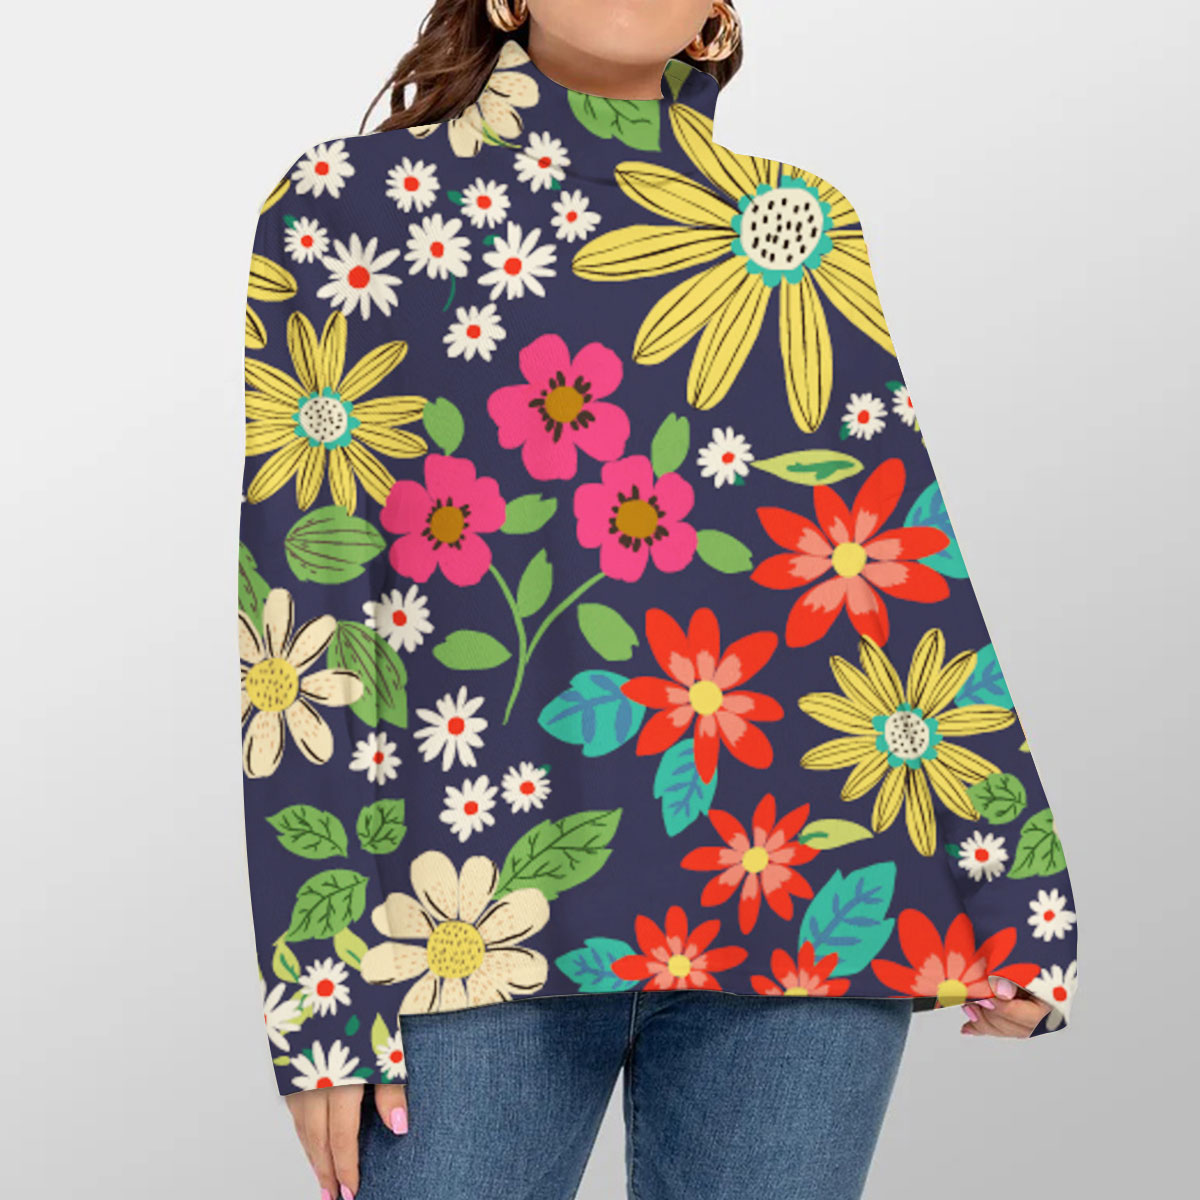 Colorful Daisy Turtleneck Sweater